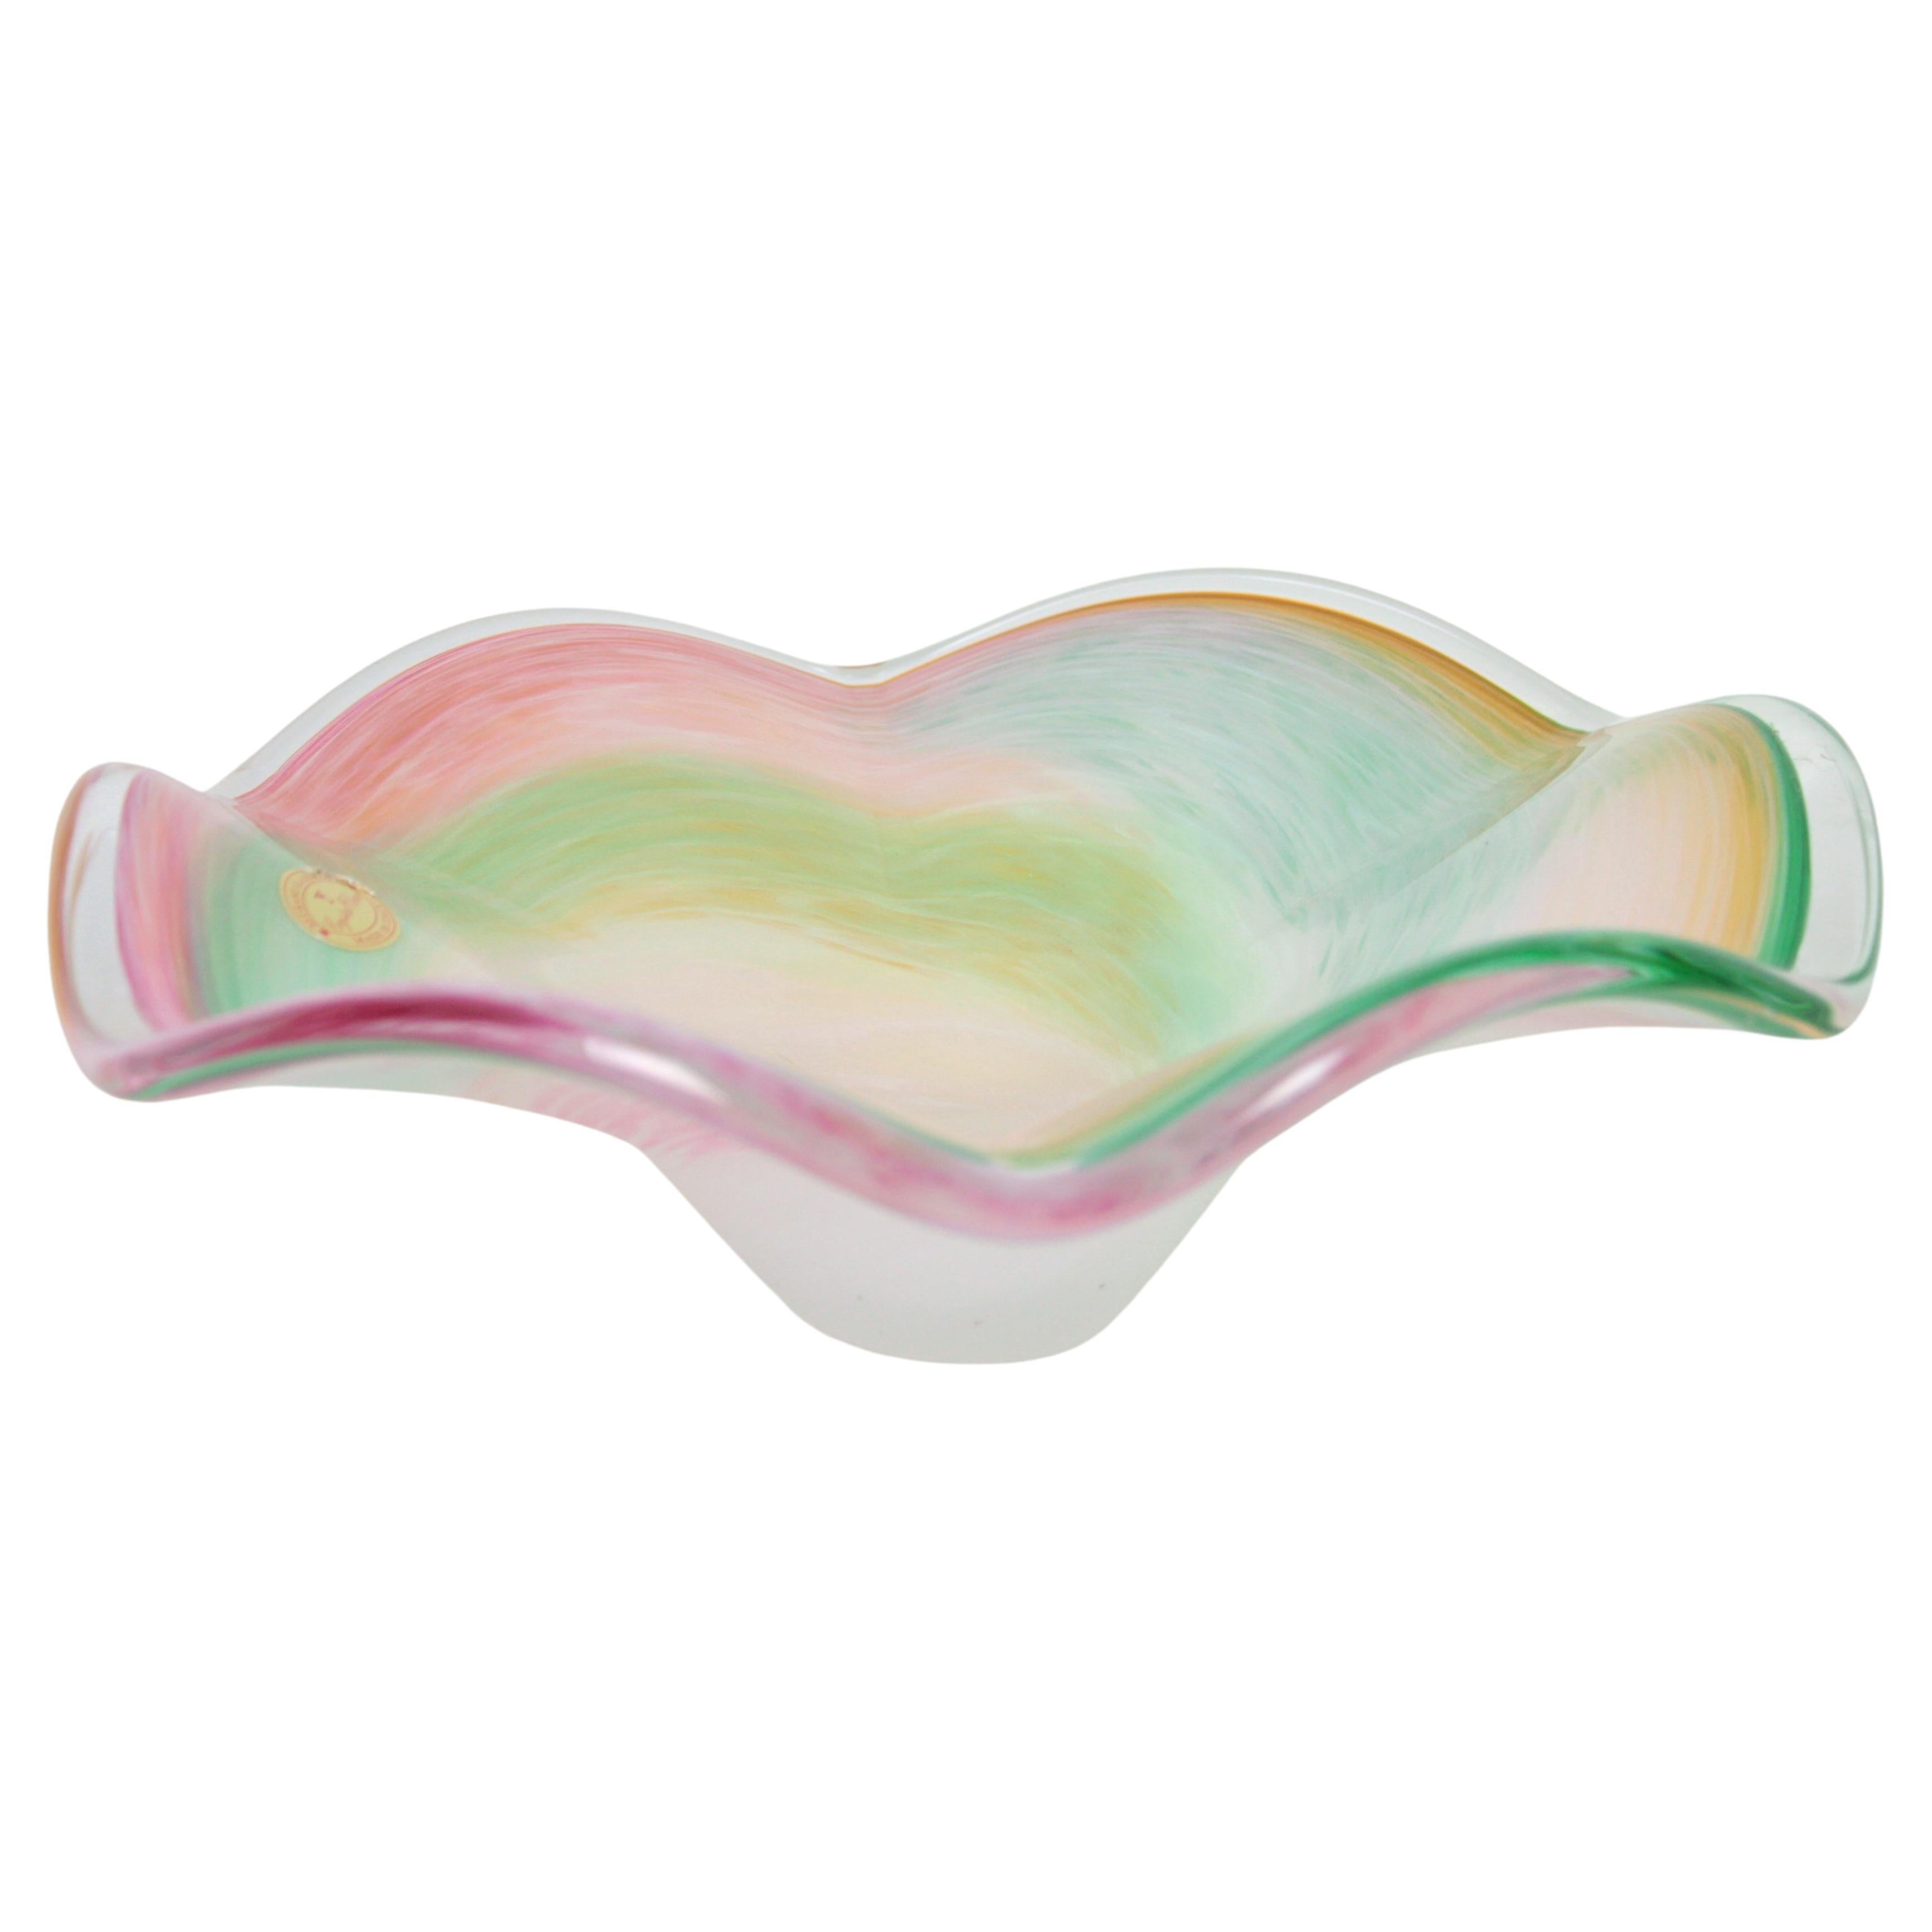 Italian Mid-Century Modern Murano glass centerpiece, white and multicolor pastel tones
This large bowl or centerpiece has free form design in handblown opaline white glass and swirls of Zanfirico pastel colors (pink, green, yellow, orange and blue)